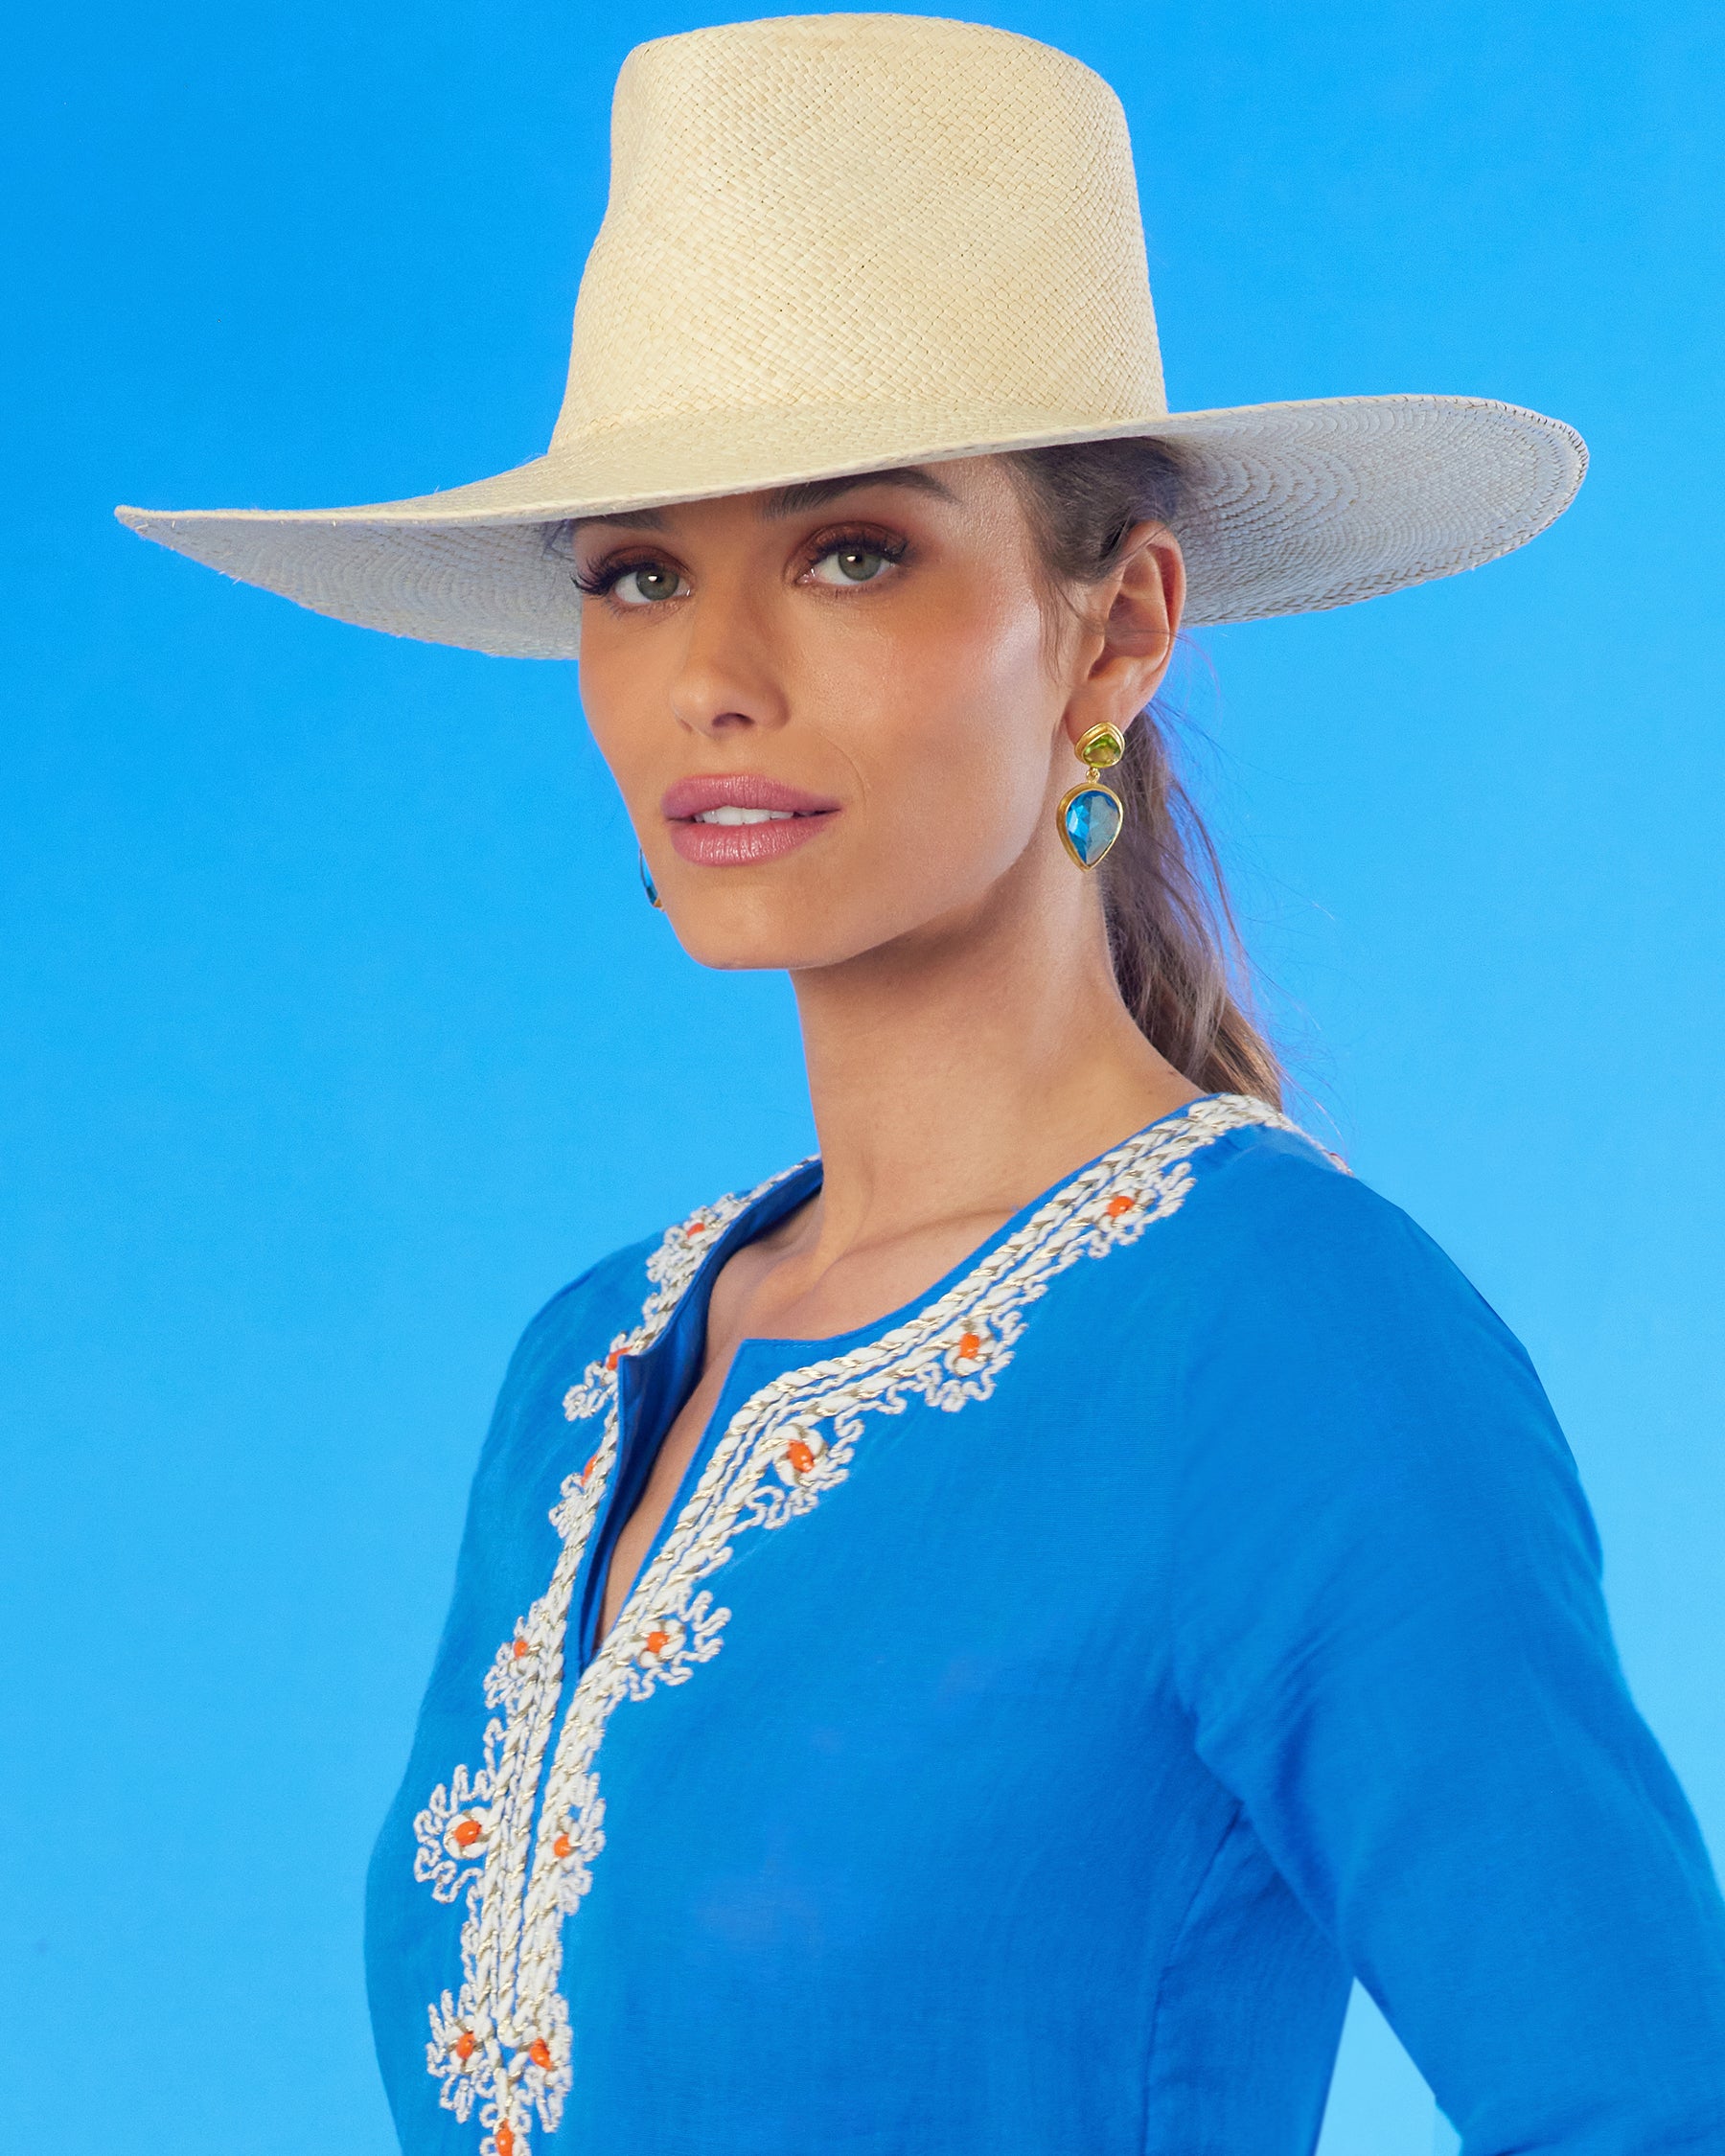 The Reinhard Plank Forte Panama Straw Hat worn with the Mallorca Tunic with Coral Embellishment